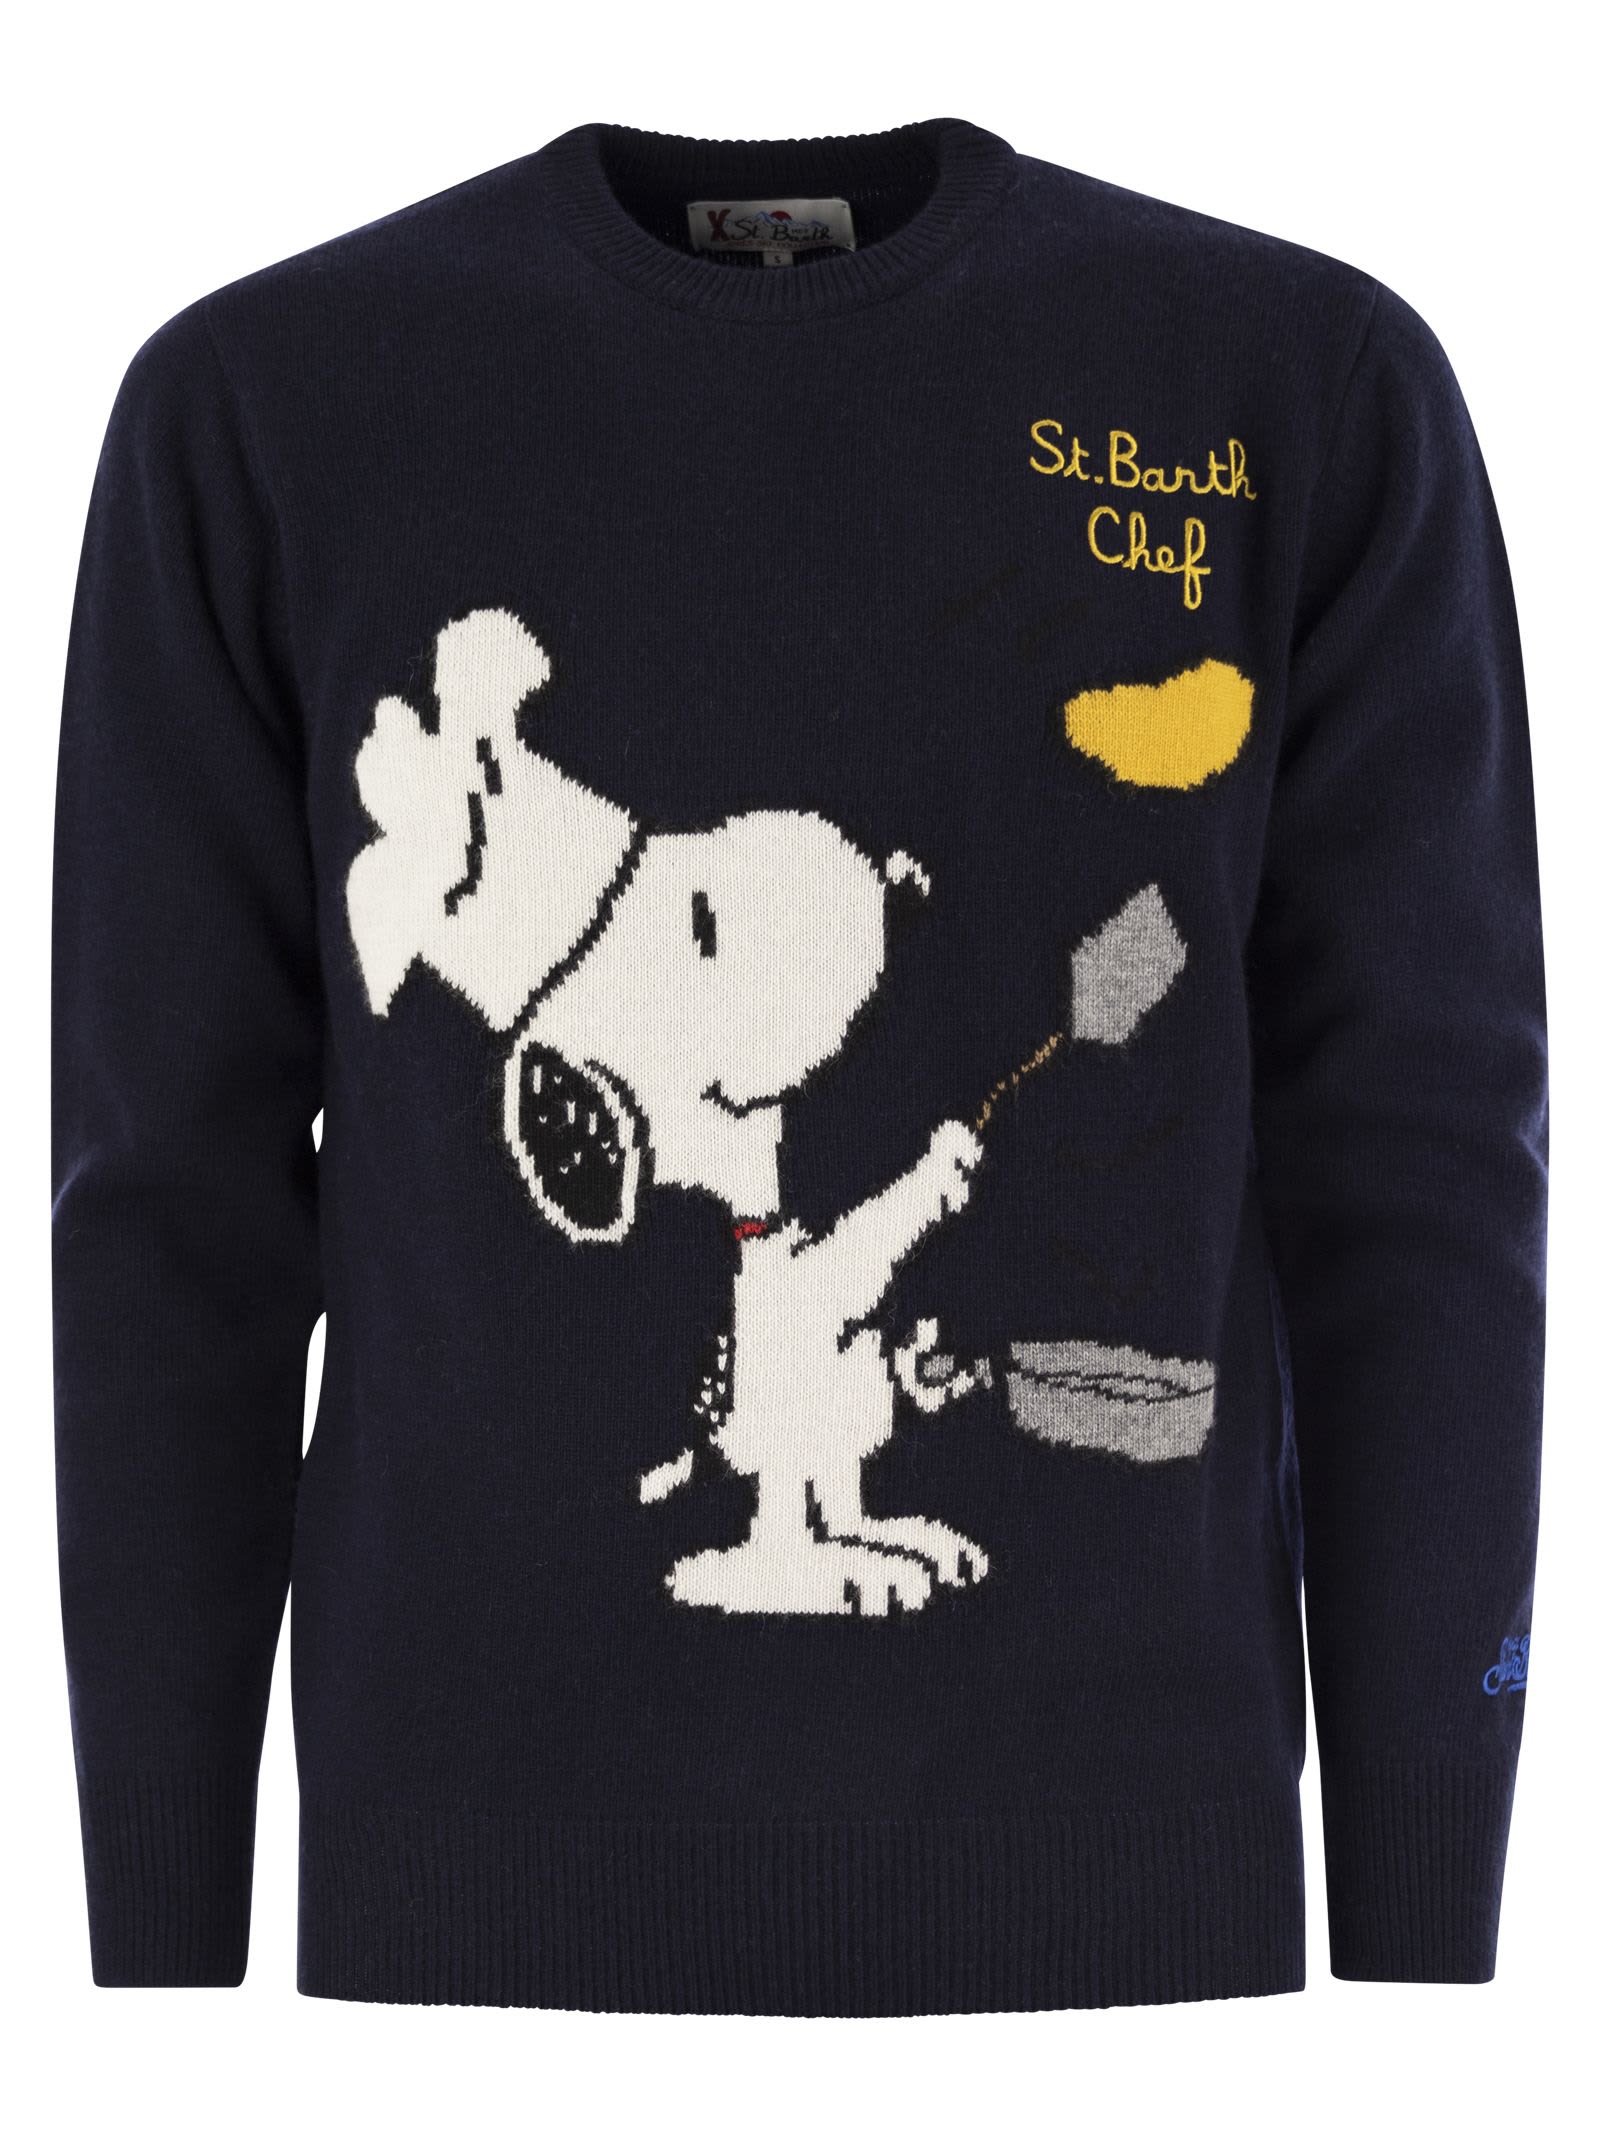 Snoopy Chef Jumper In Wool And Cashmere Blend